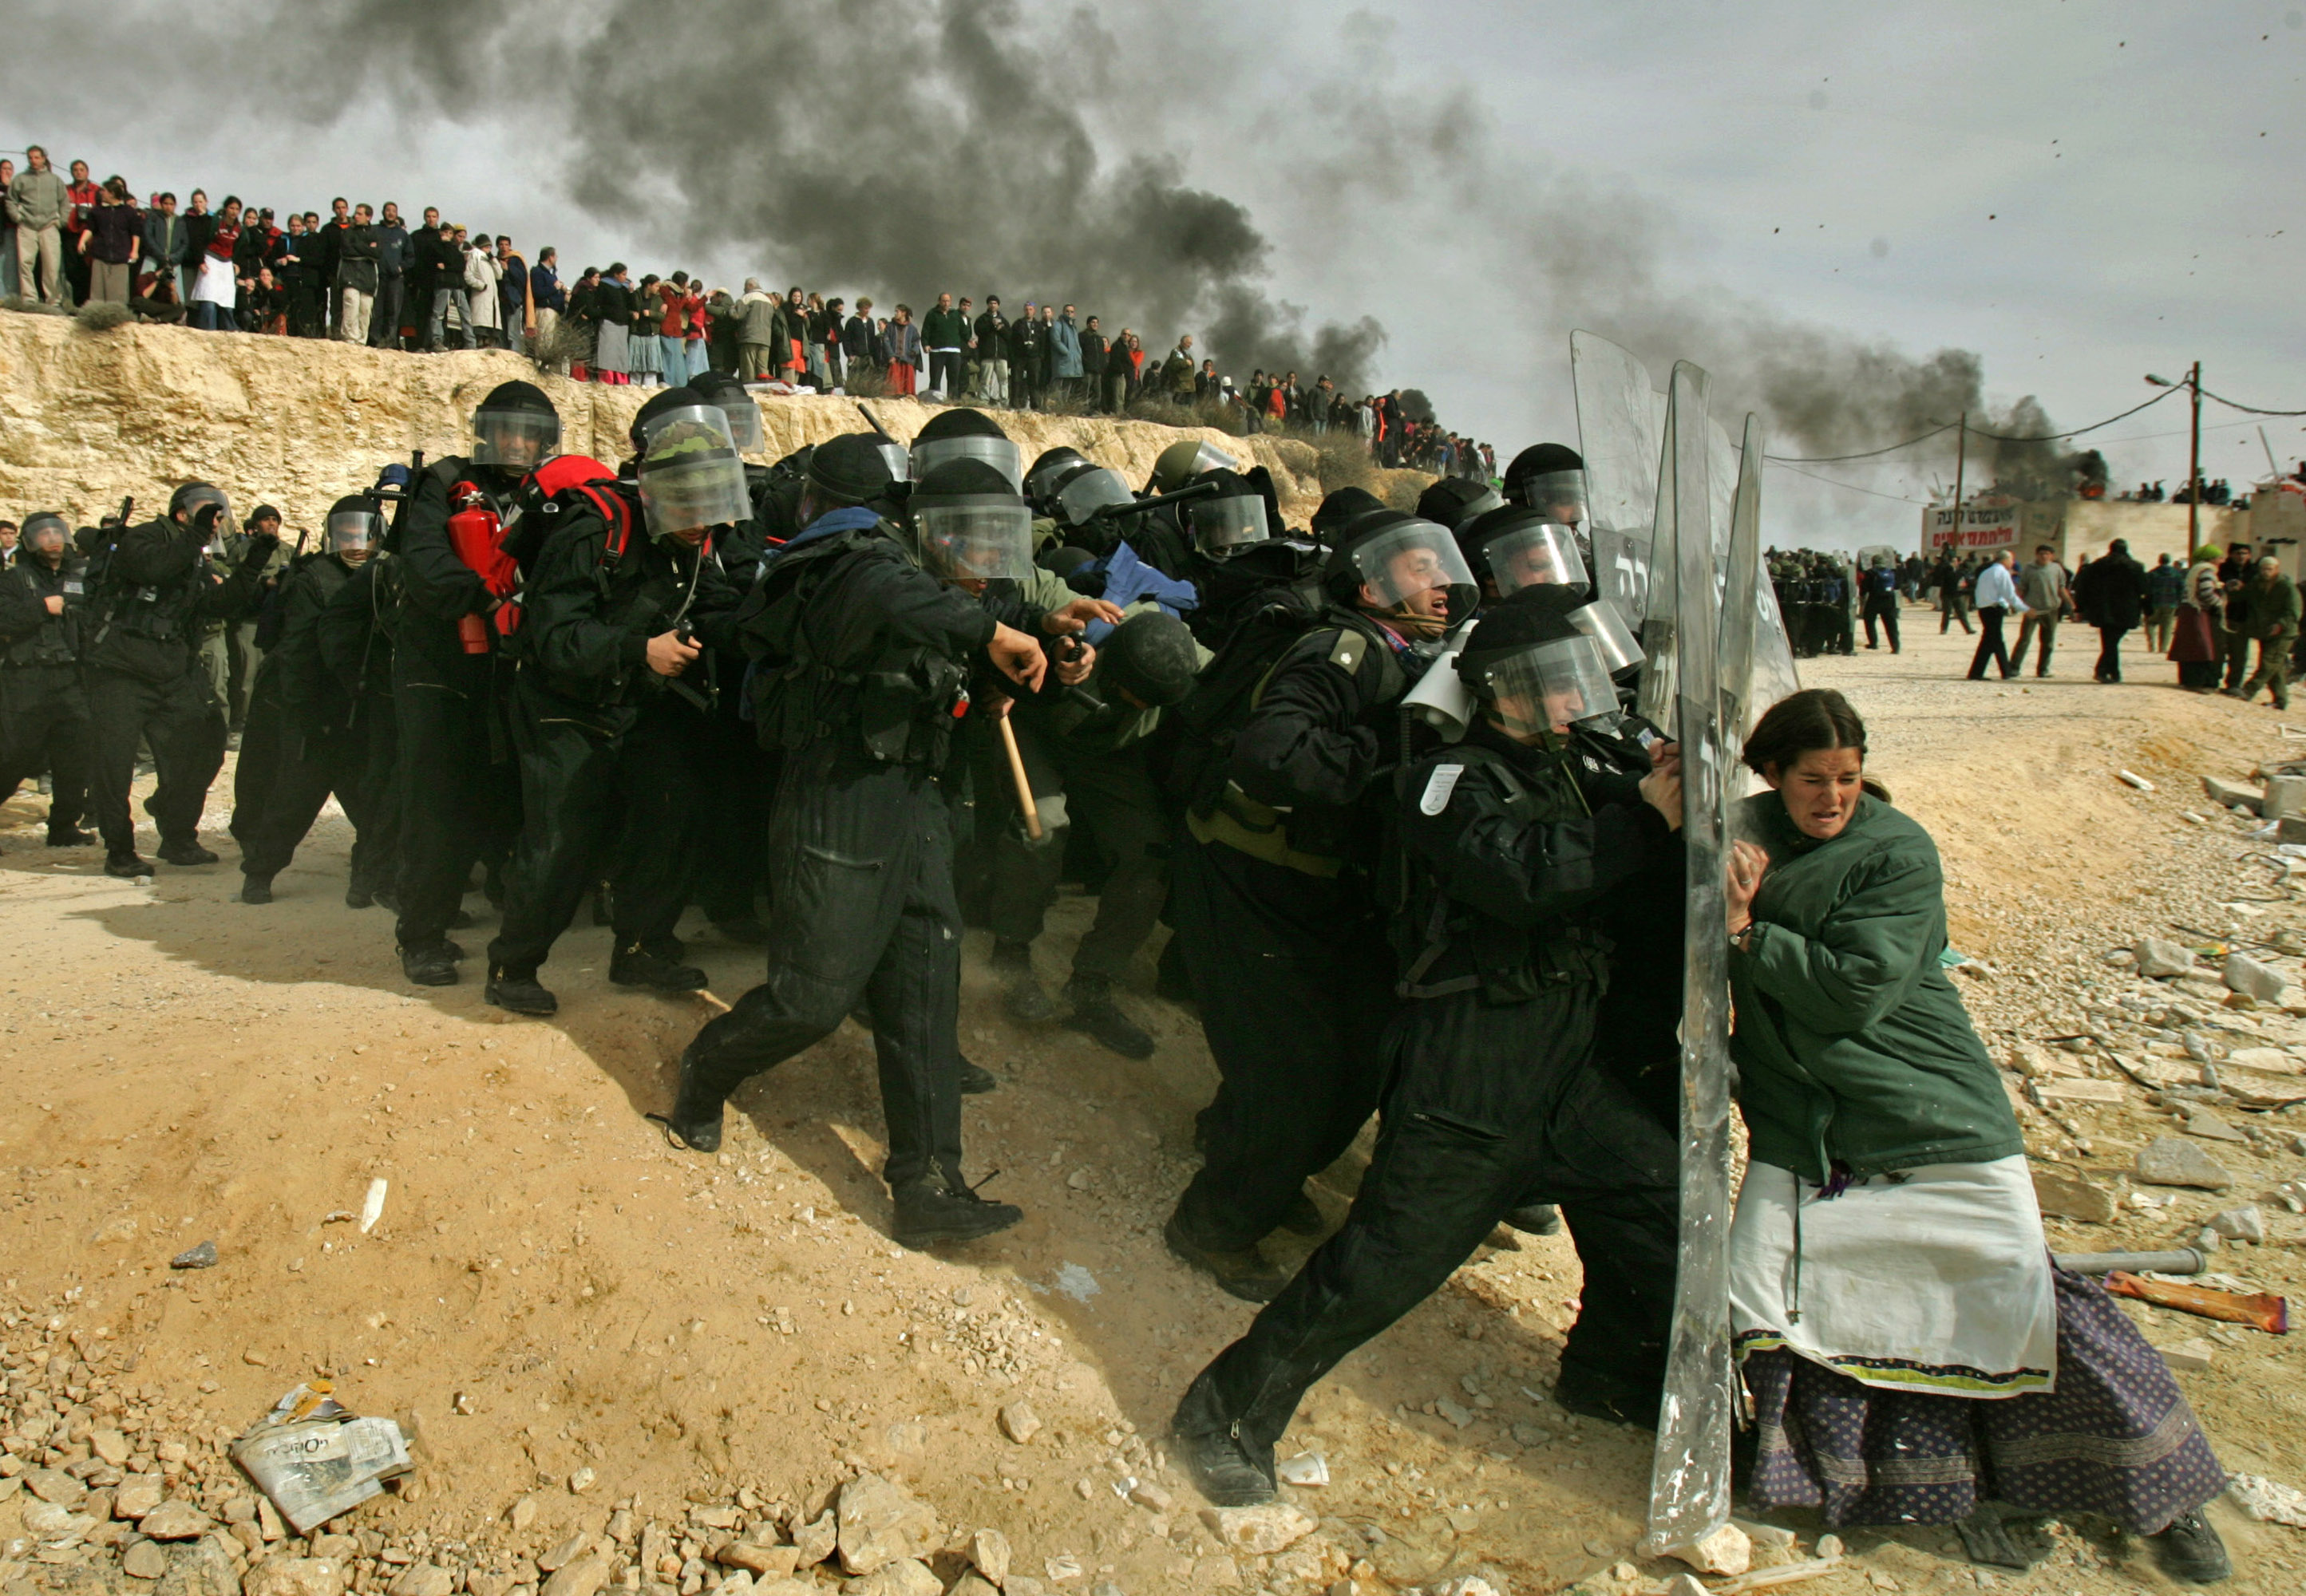 2007:  Oded Balilty – “West Bank Jewish Woman.”  A lone Jewish settler challenges Israeli security officers during clashes that erupted as authorities cleared the West Bank settlement of Amona, east of the Palestinian town of Ramallah, Feb. 1, 2006. Thousands of troops in riot gear and on horseback clashed with hundreds of stone-throwing Jewish settlers holed up in this illegal West Bank outpost after Israel’s Supreme Court cleared the way for demolition of nine homes at the site.